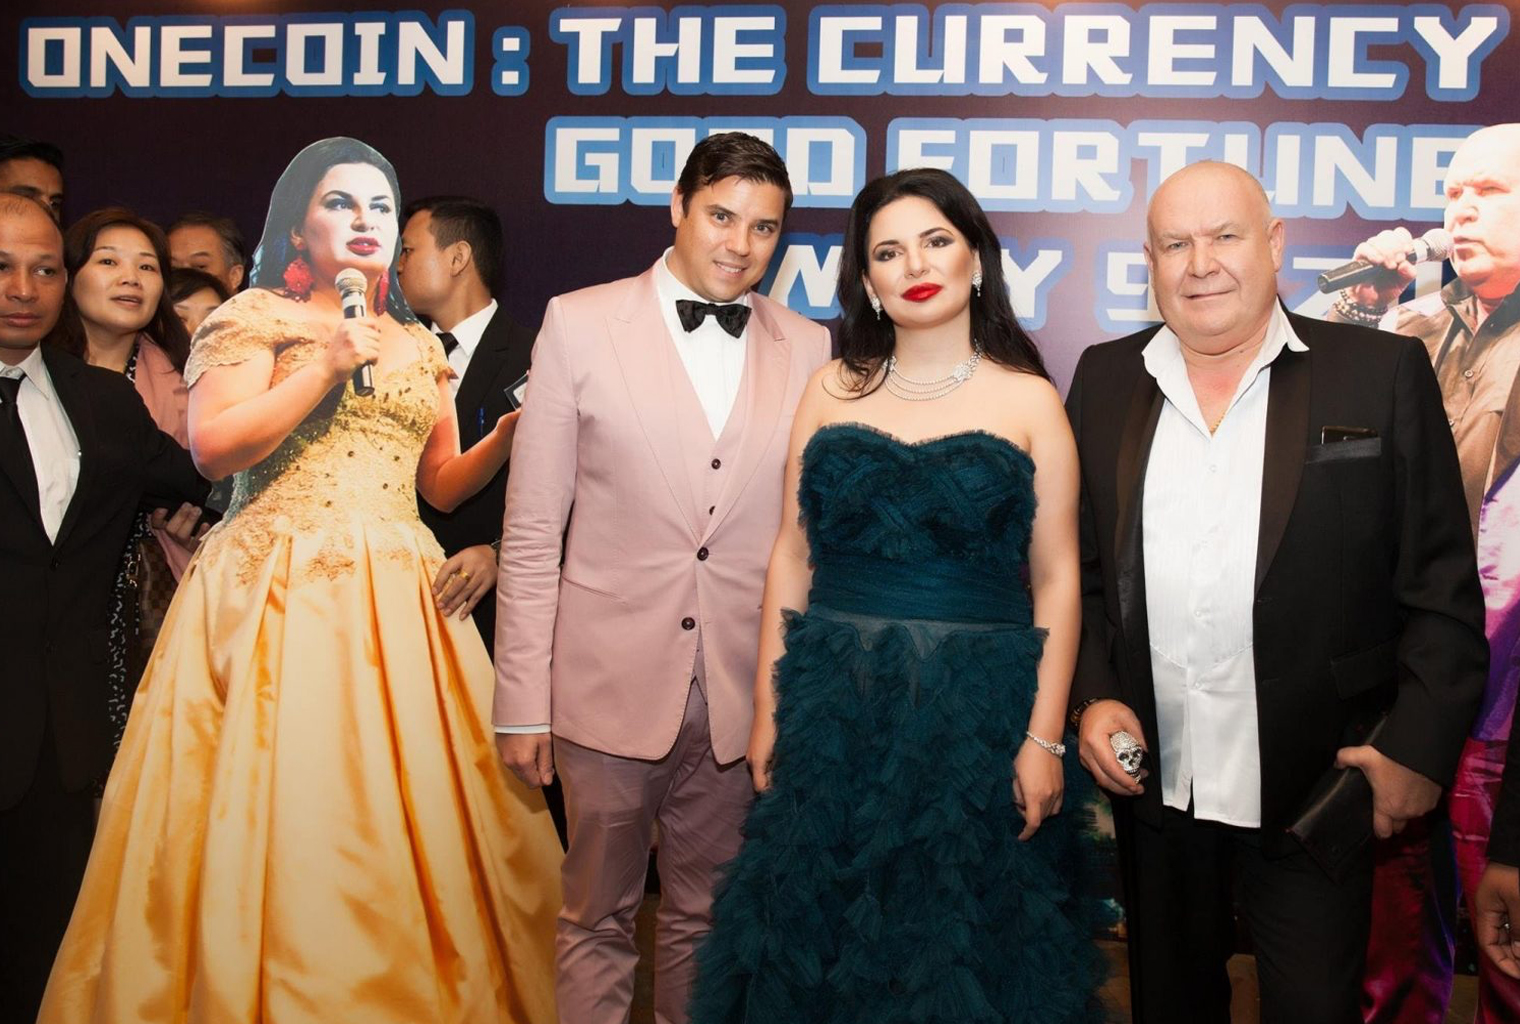 OneCoin was driven by flashy marketing, including huge over-produced events.